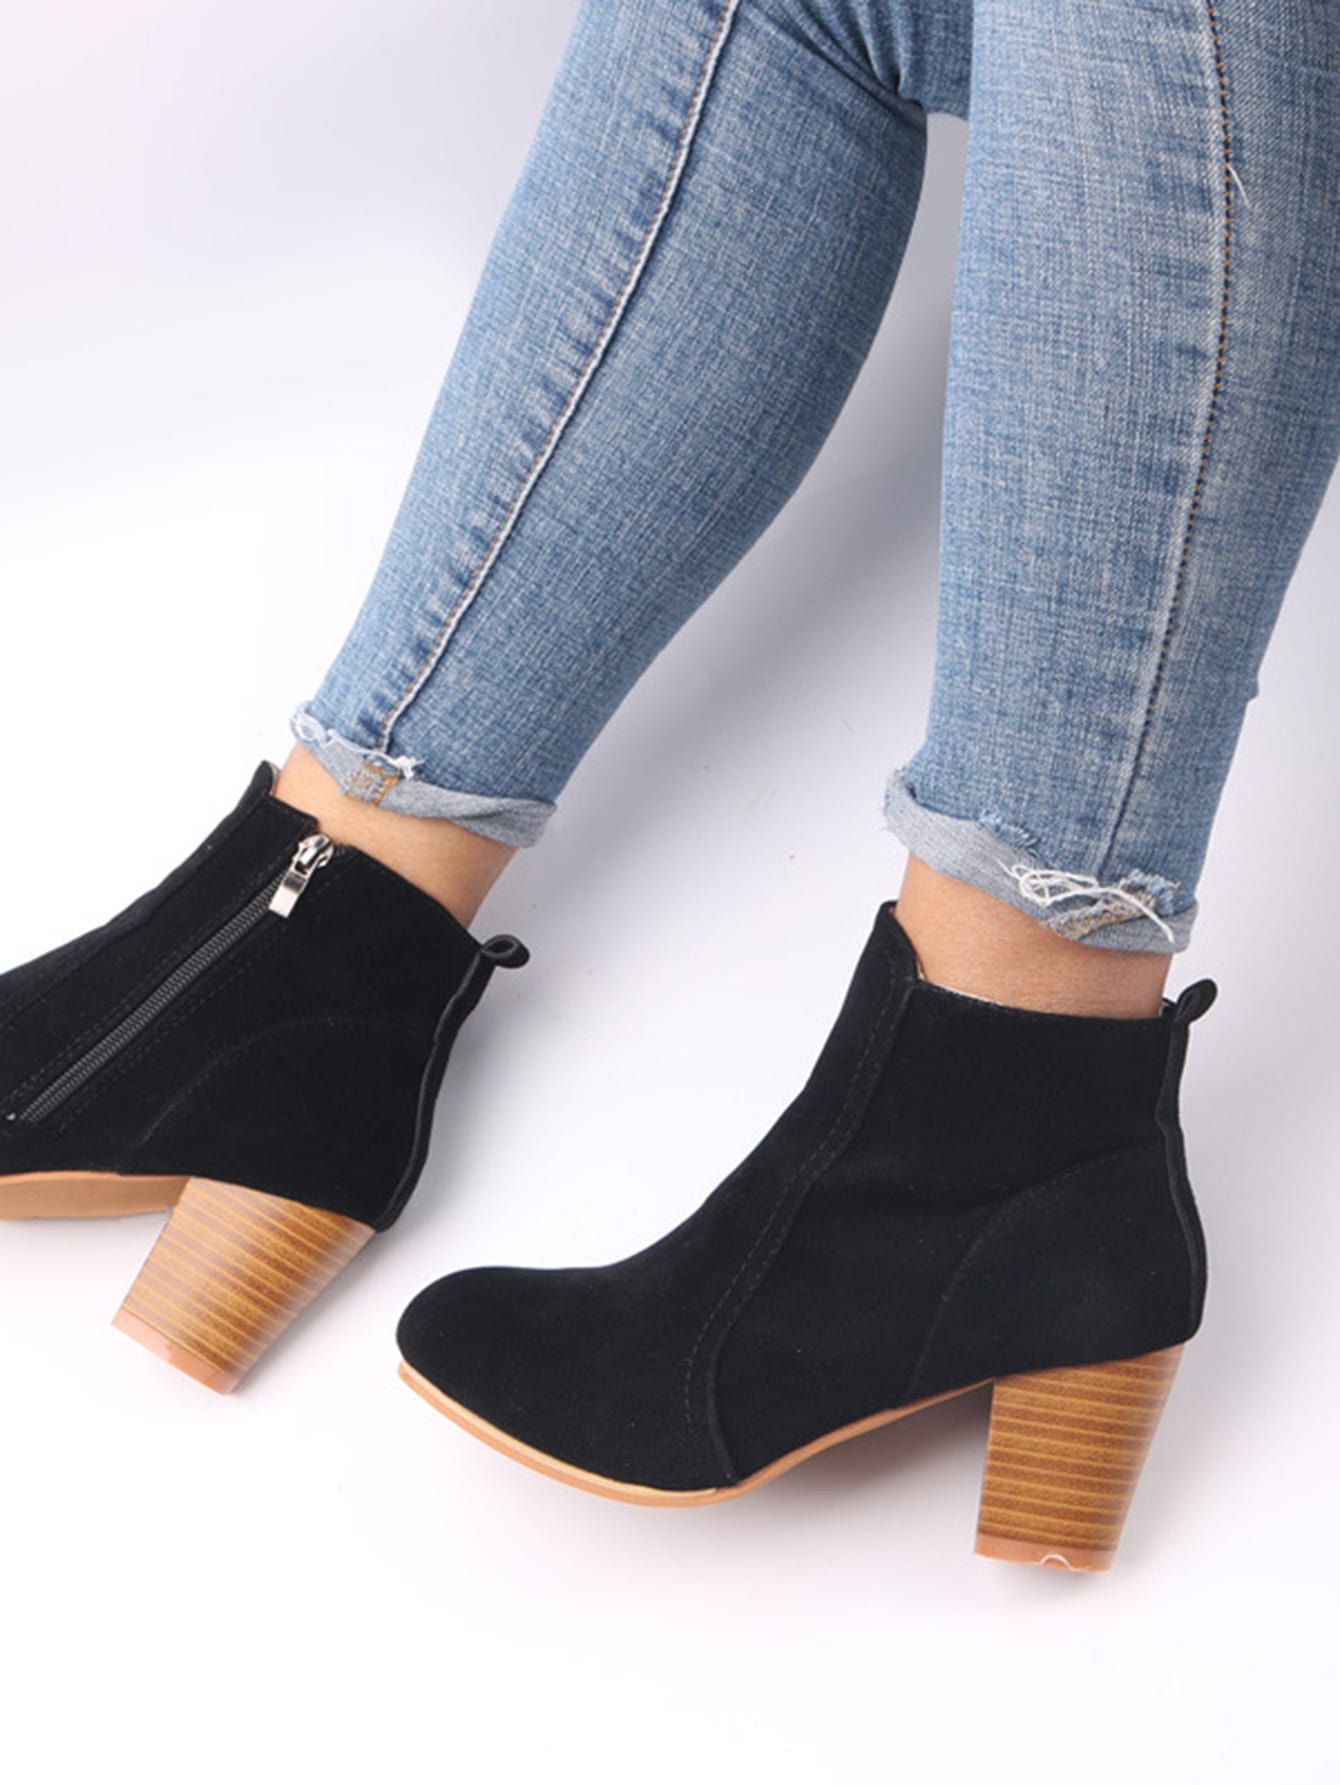 Women Faux Suede Zip Side Boots, Round Toe Chunky Heeled Classic Boots - Sellinashop